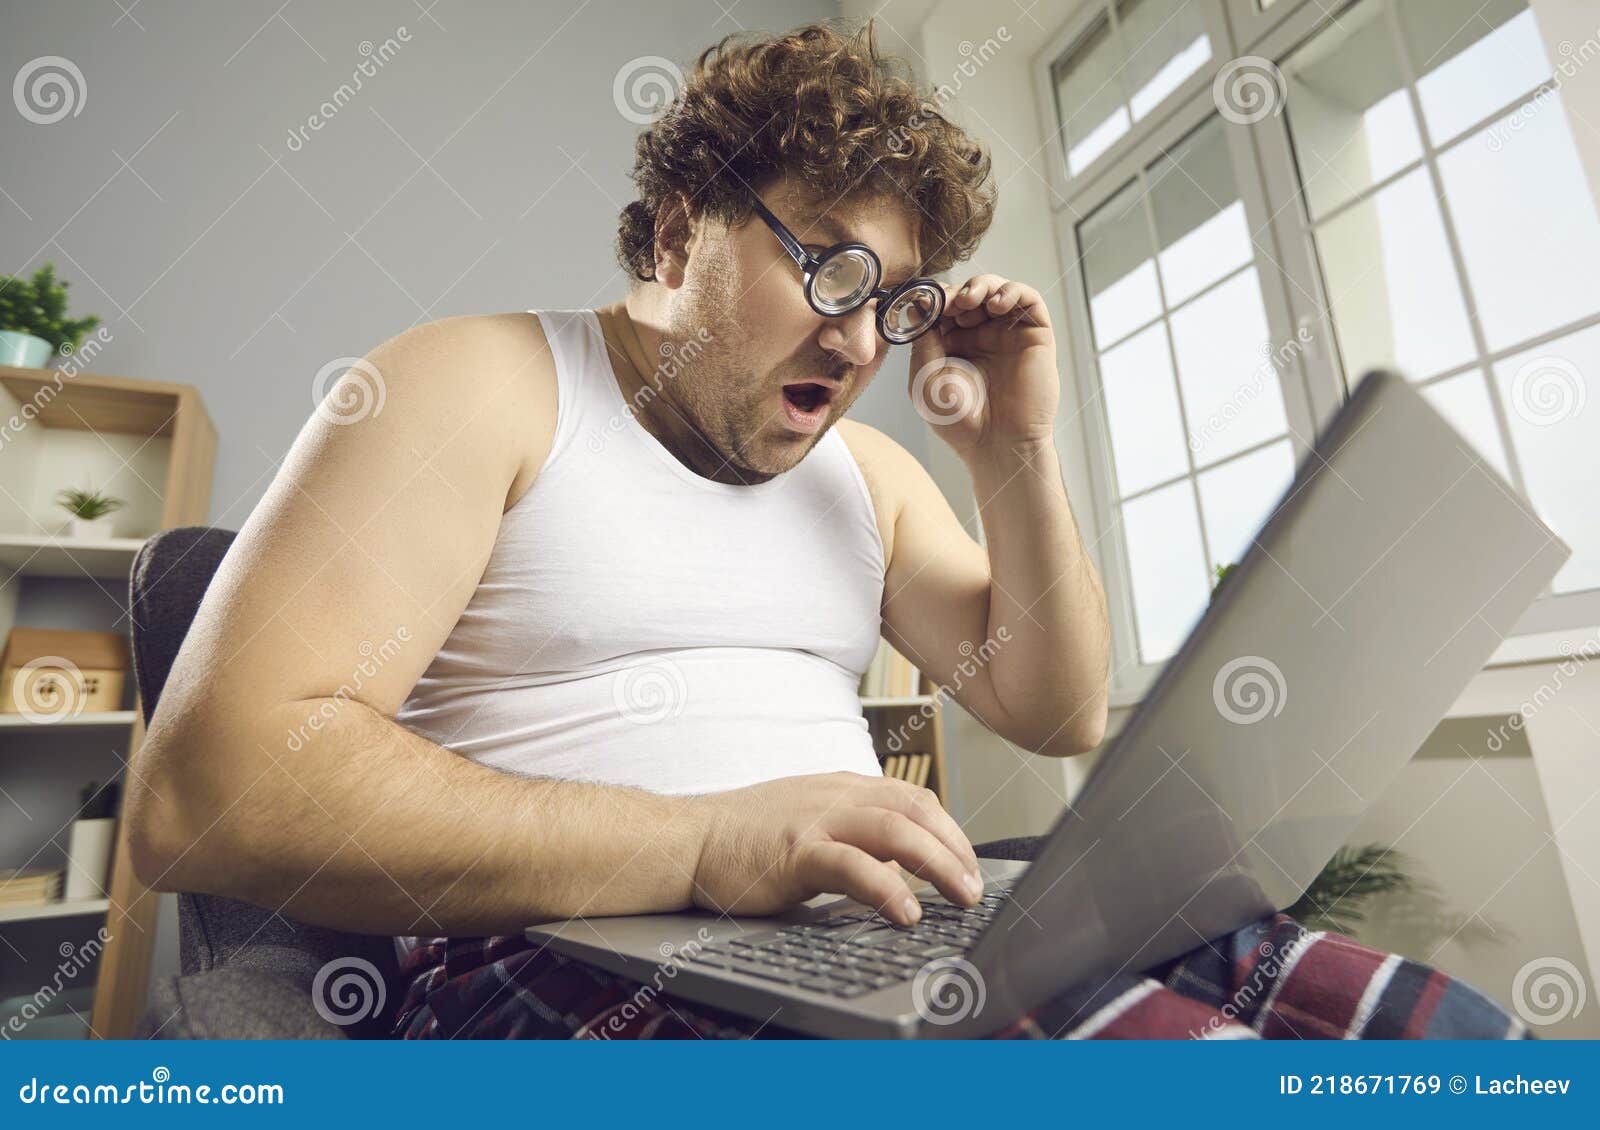 Surprised Shocked Funny Fat Man in Pajamas Reads Amazing News on Laptop  Stock Image - Image of emotion, home: 218671769